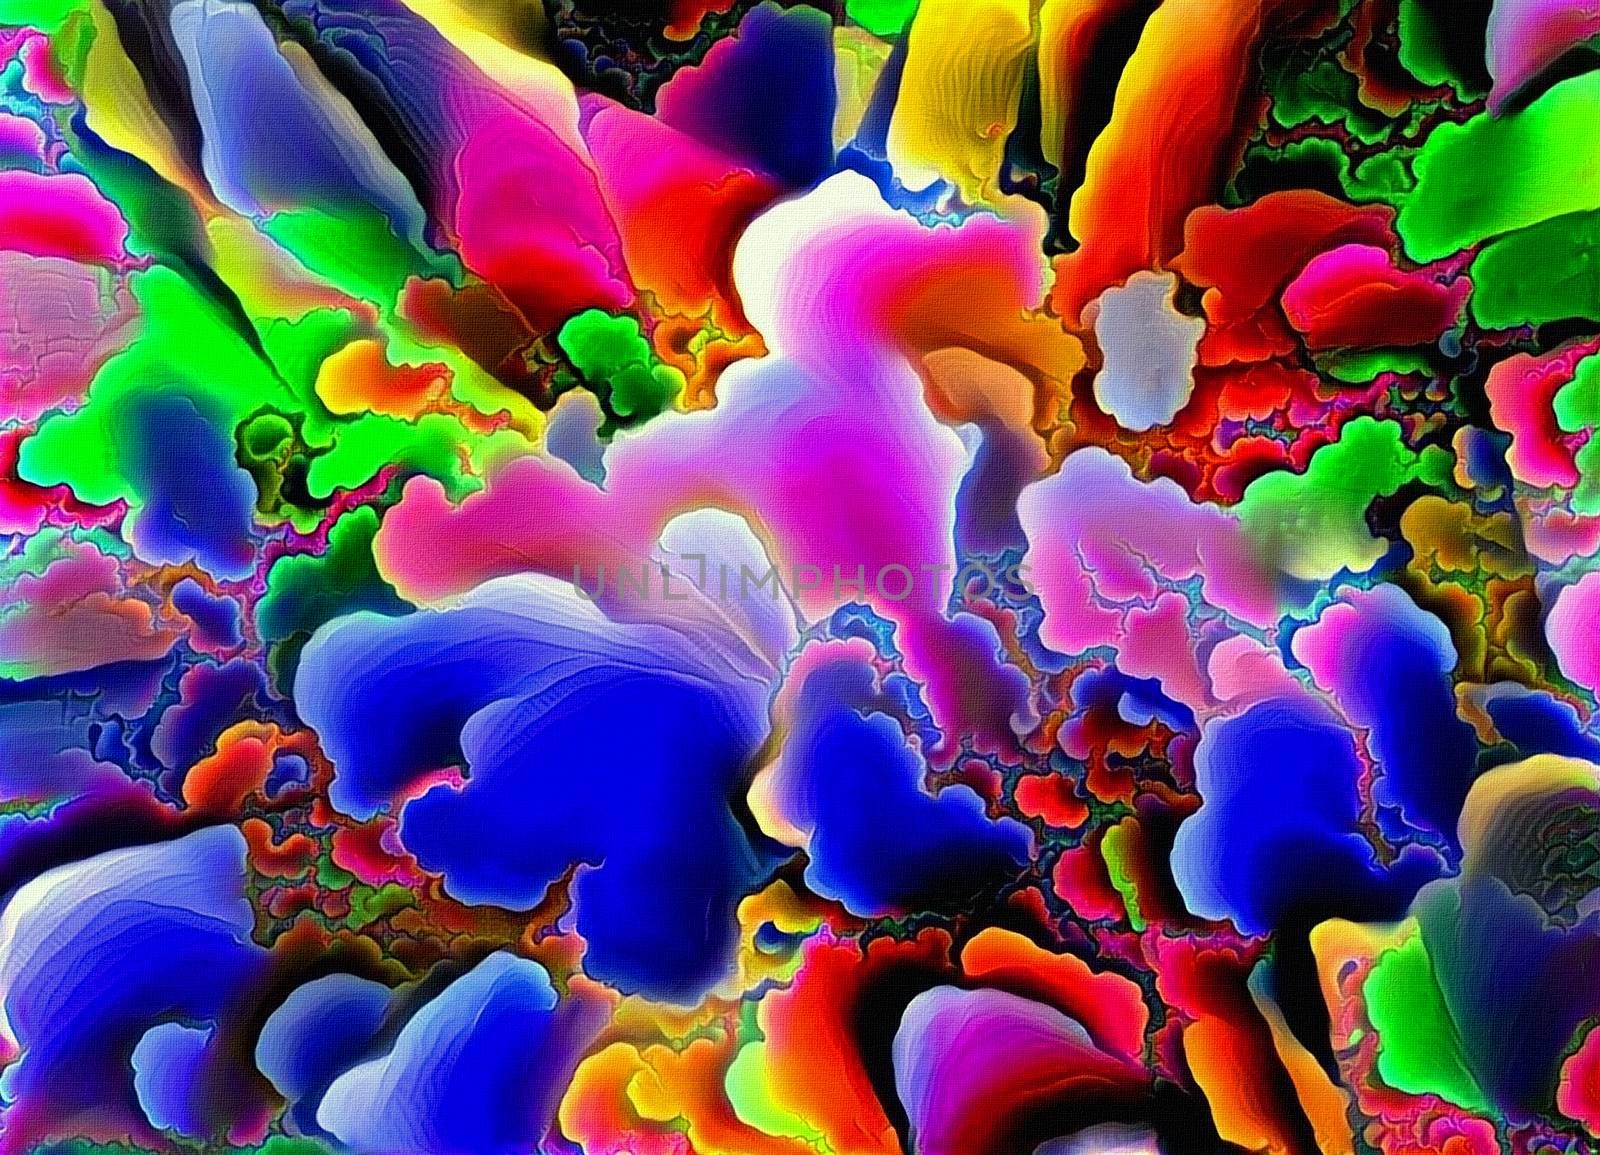 Vivid abstract painting. Colorful clouds